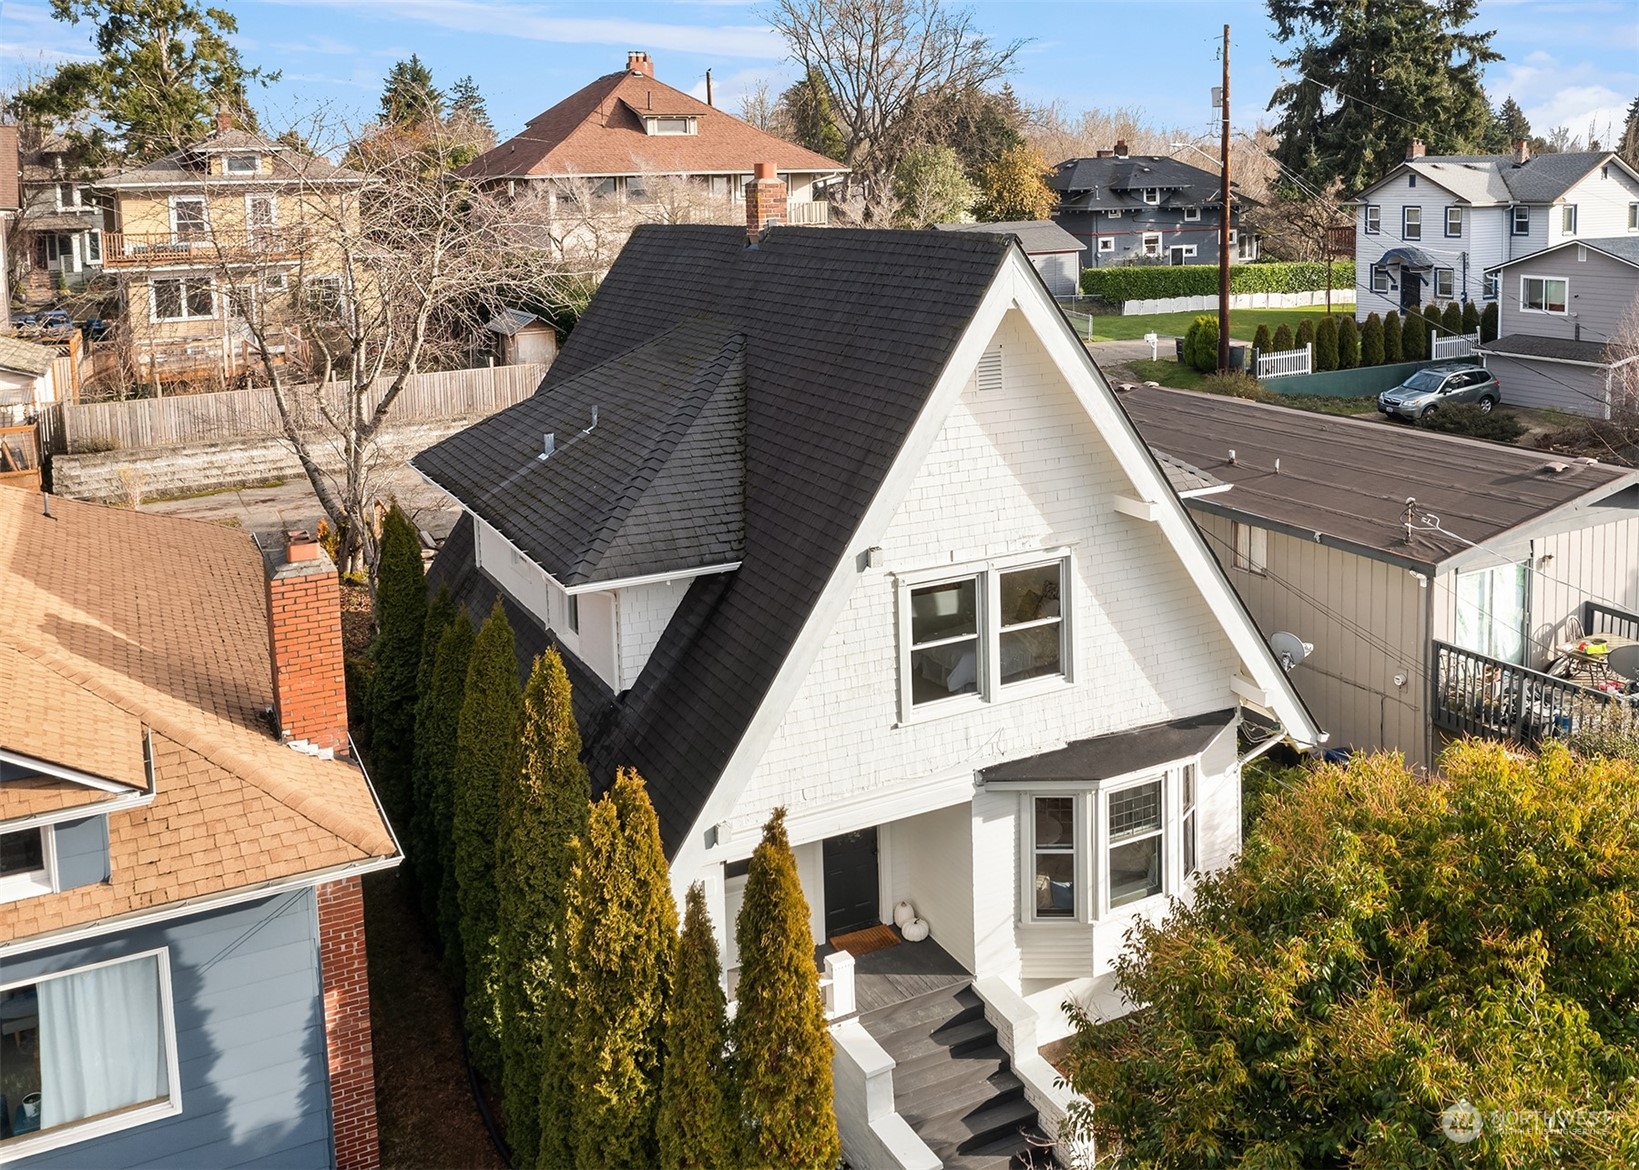 Seattle - Capitol Hill/Madrona Park (98122), WA Real Estate Housing Market & Trends | Coldwell Banker